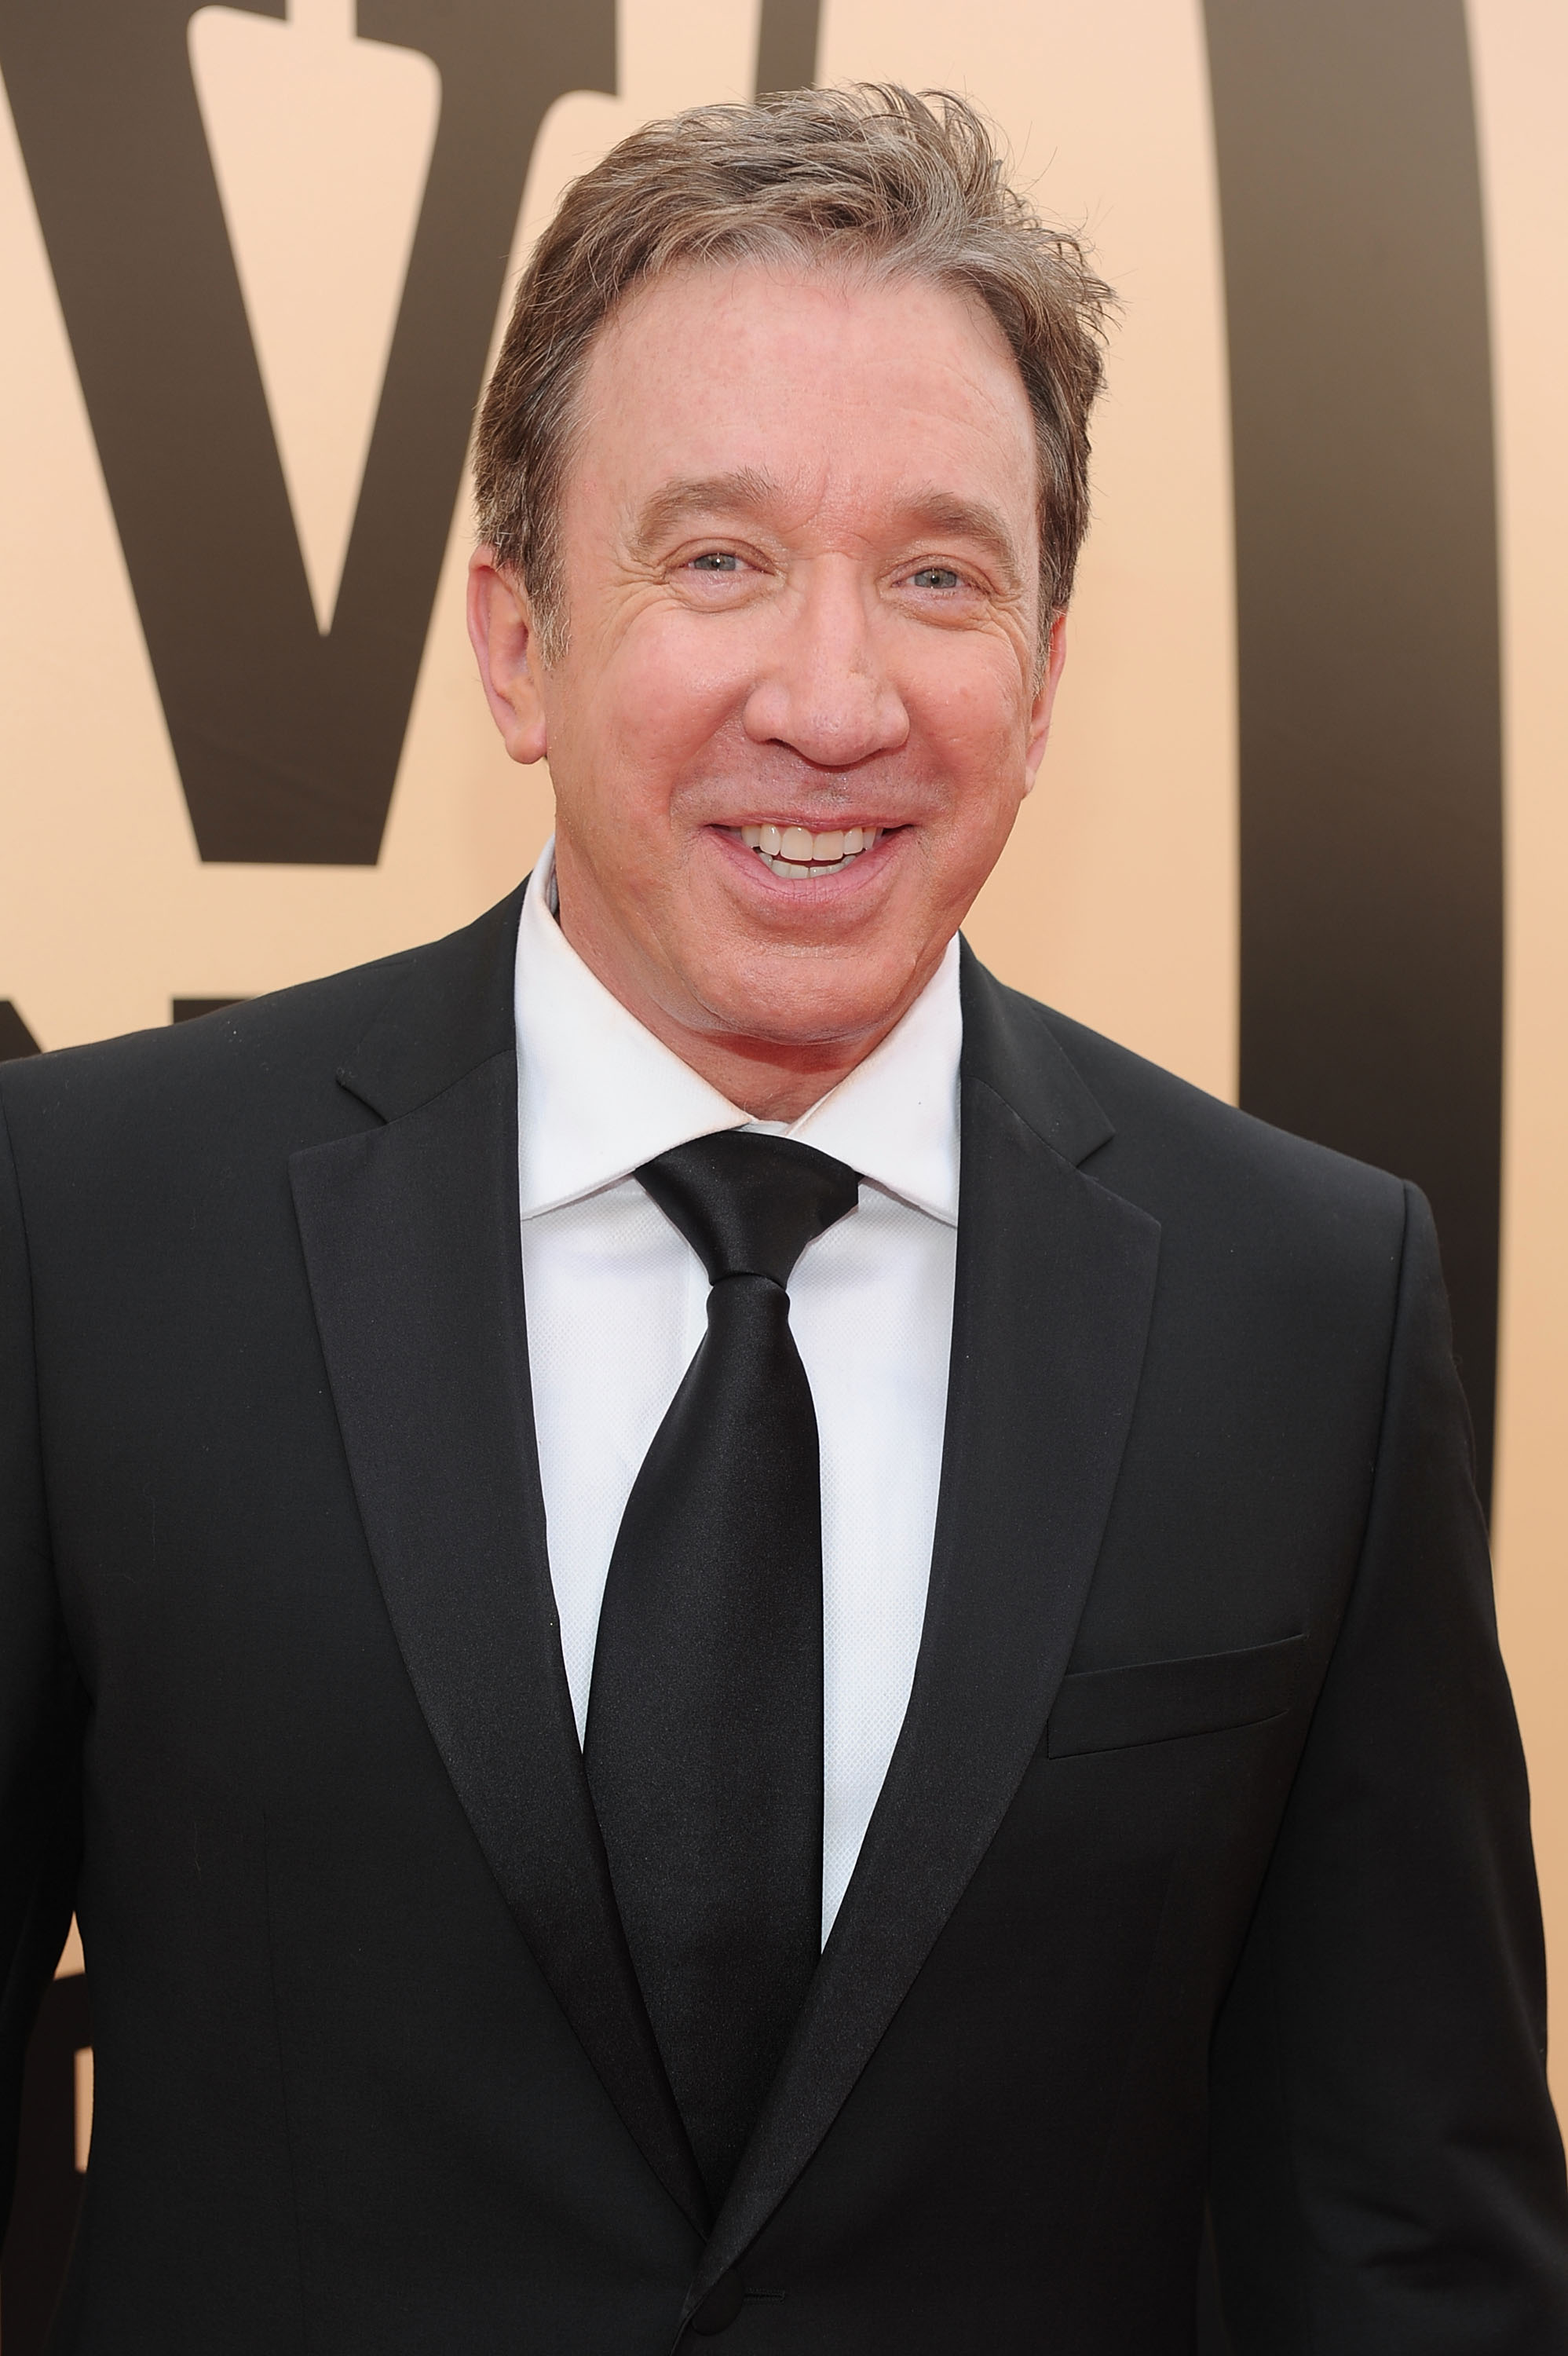 Tim Allen compares Hollywood to Nazi Germany - NZ